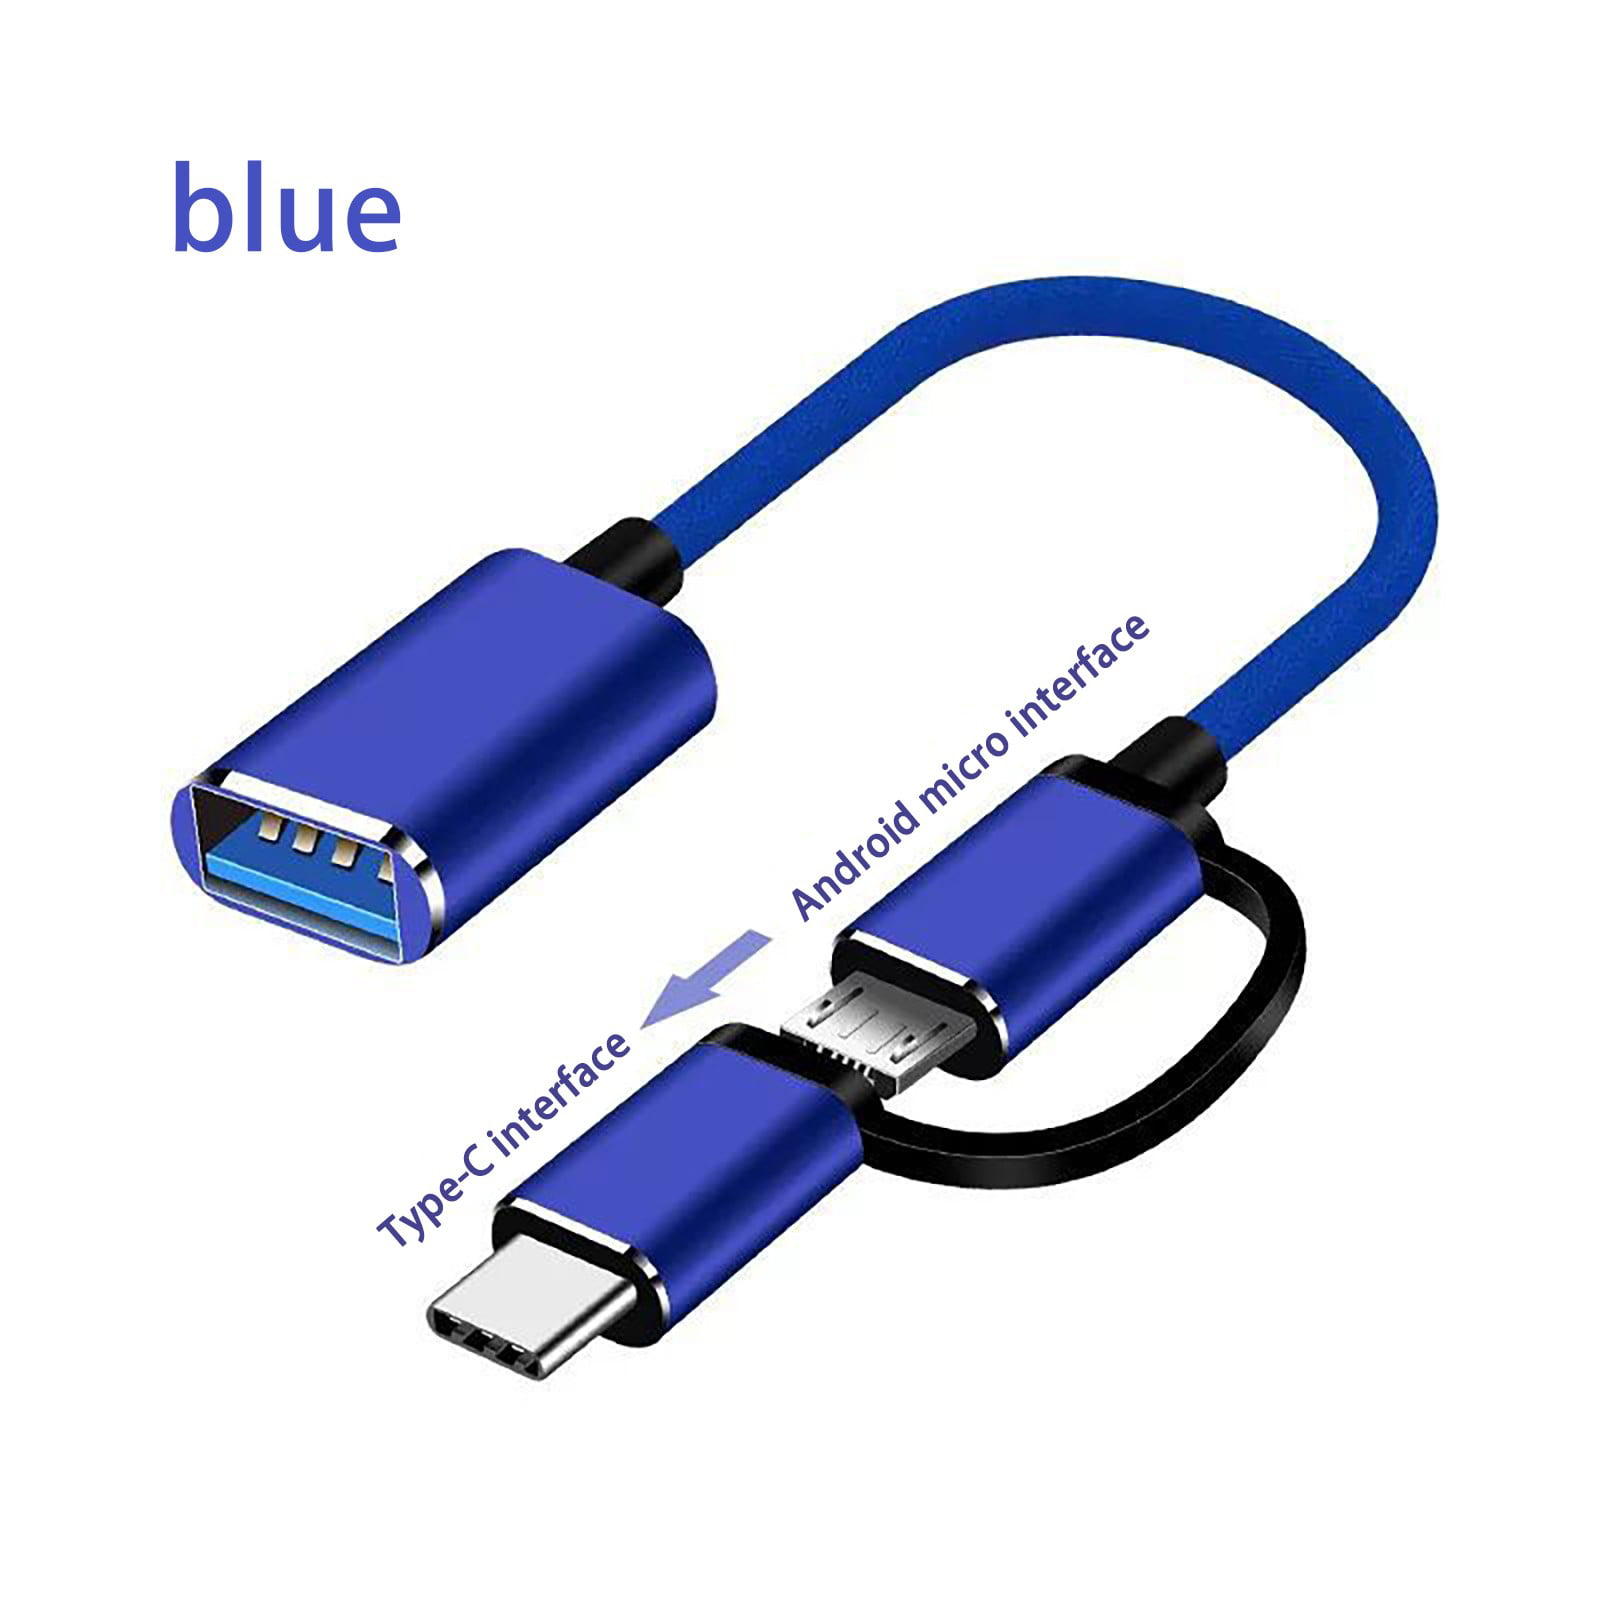 USB C to USB Adapter 2 1 Adapter Cable. Micro USB C Male to USB Female OTG Cable - Walmart.com